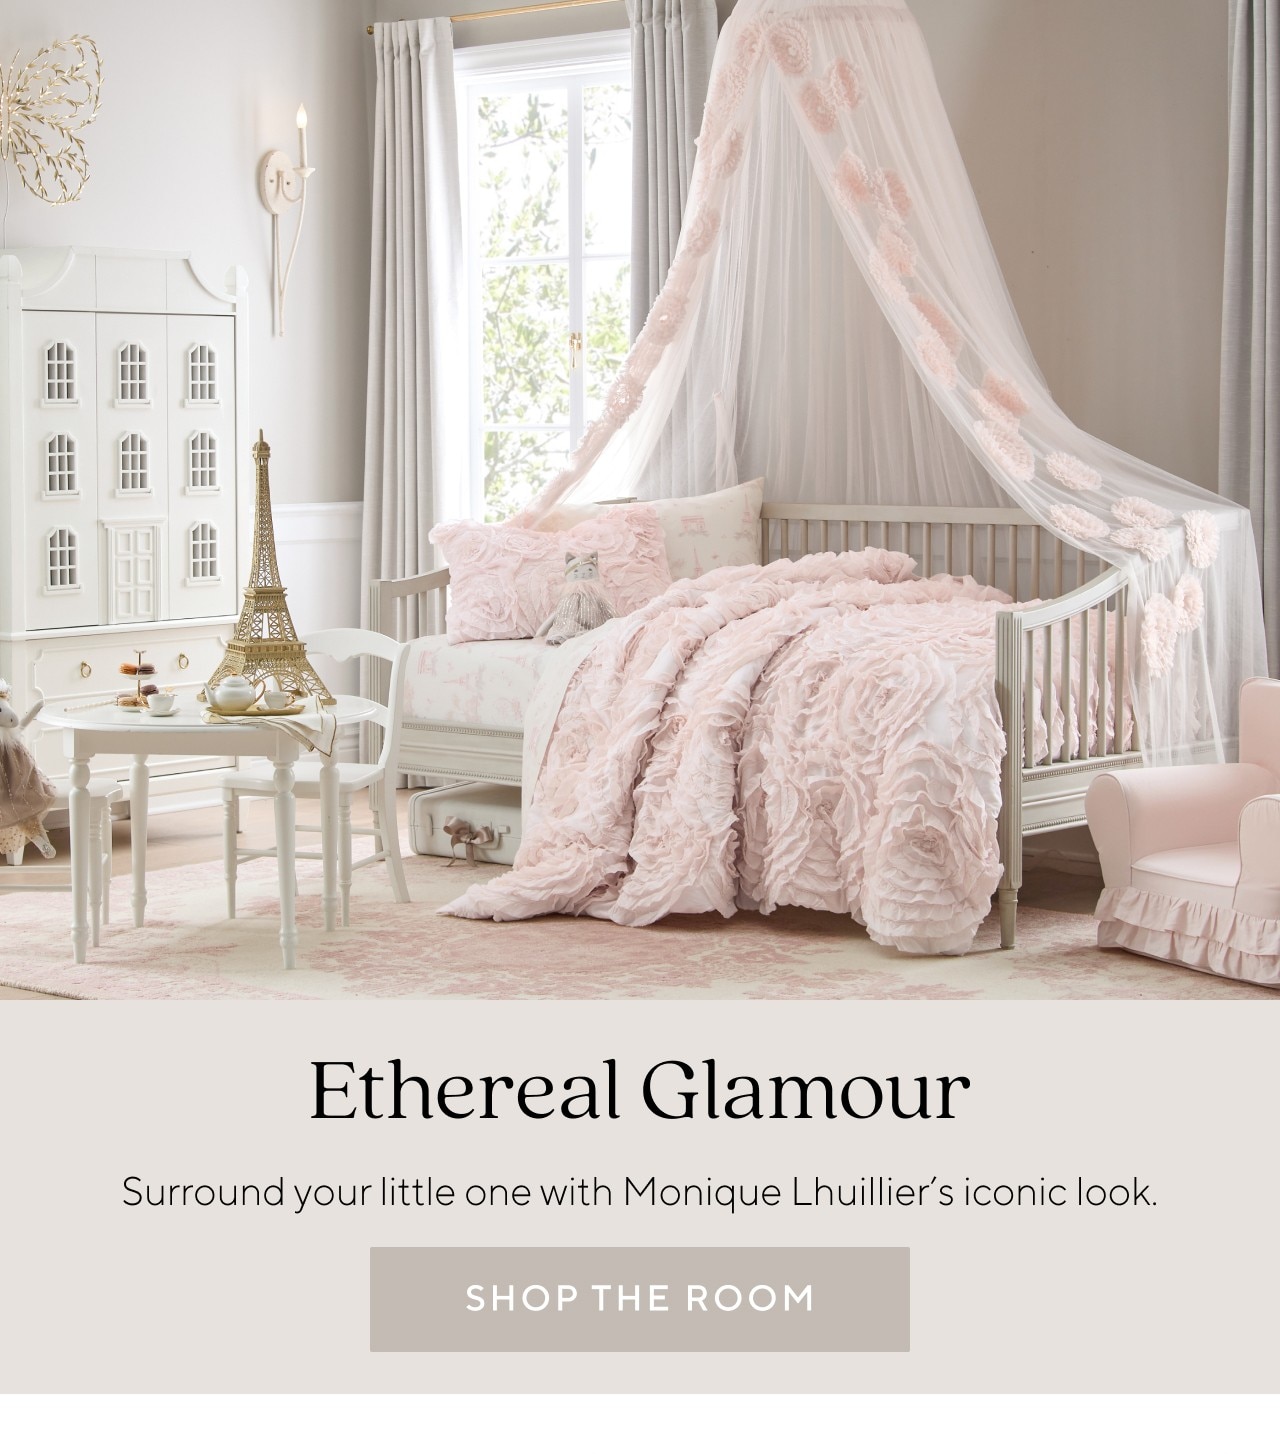 ETHEREAL GLAMOUR